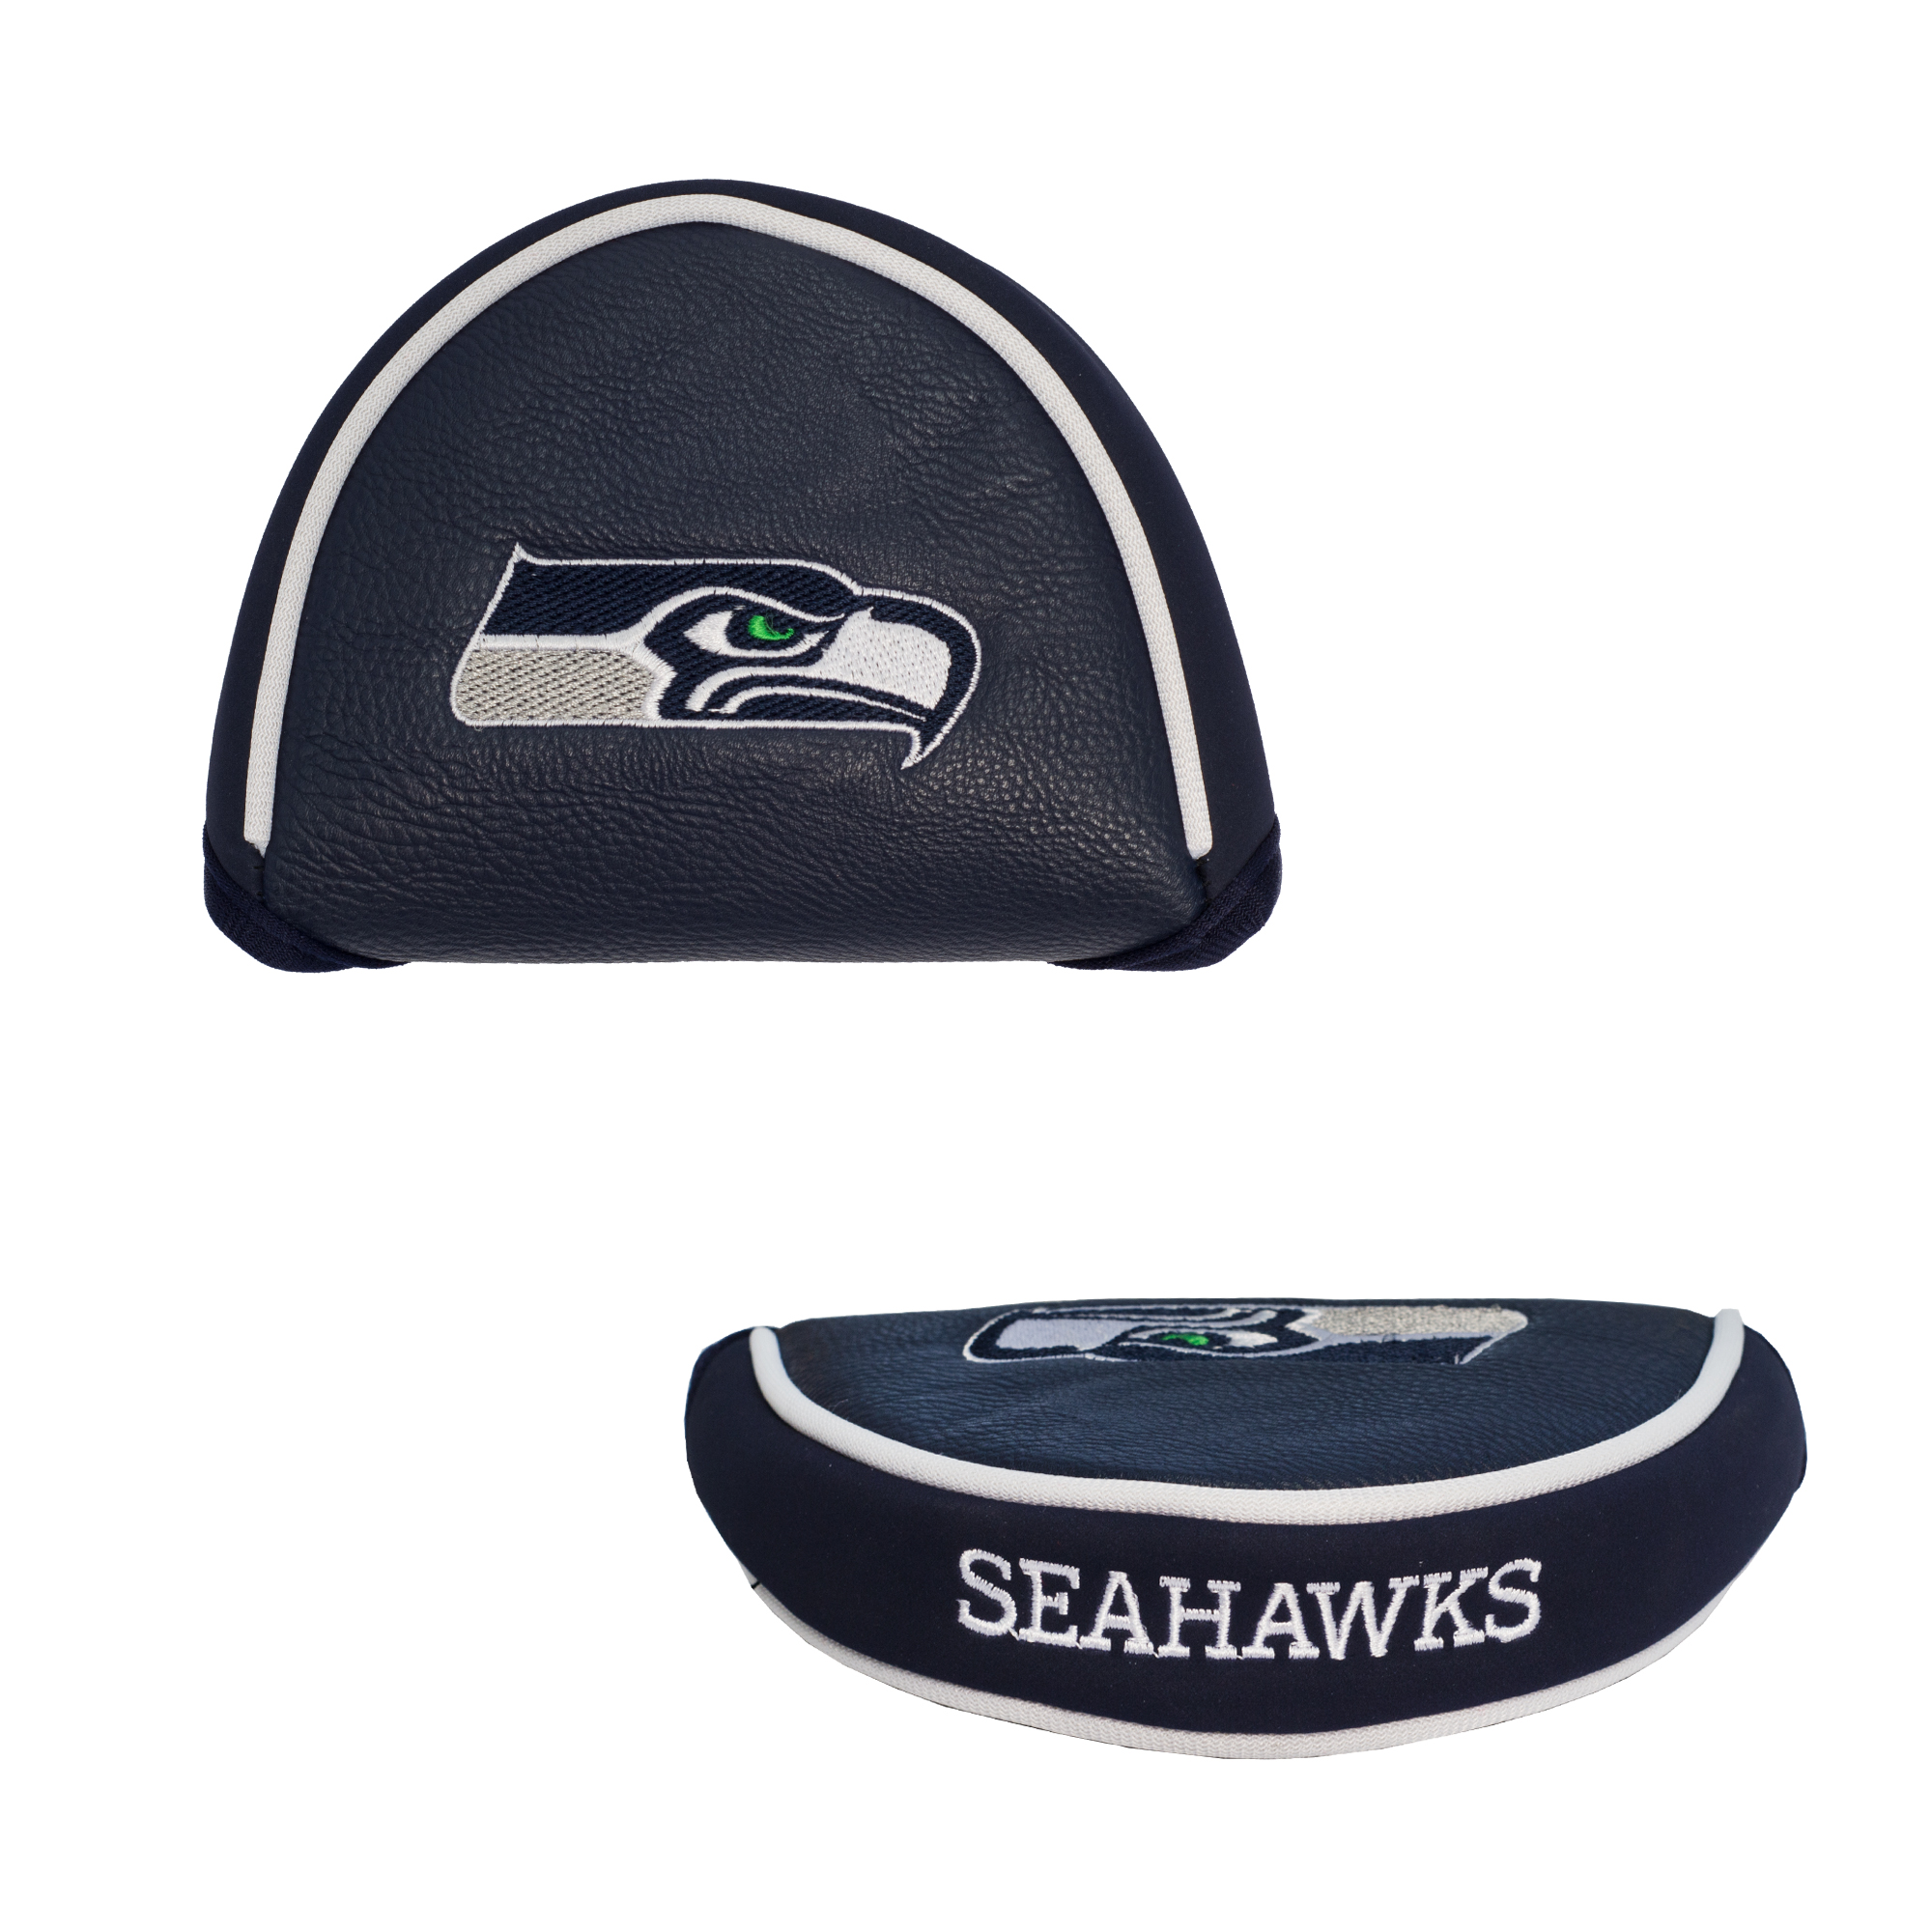 Seattle Seahawks Mallet Putter Cover